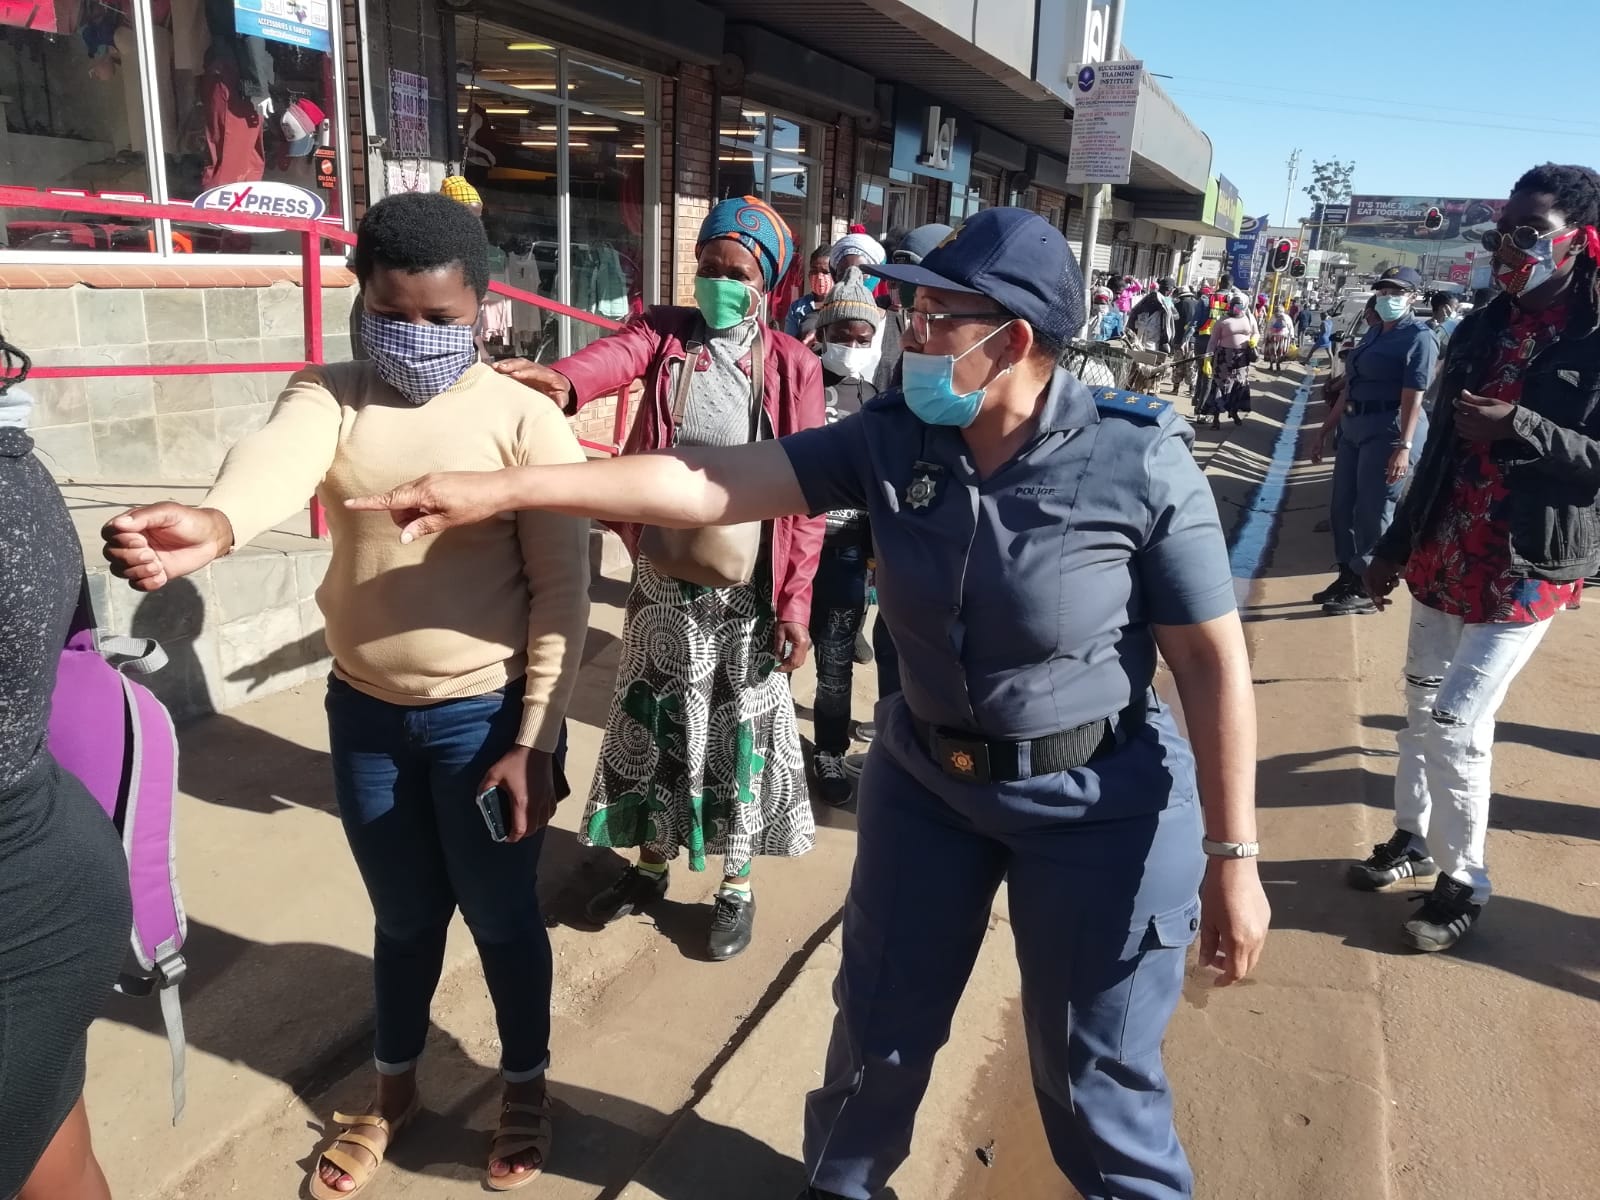 COVID-19 awareness campaign held in Eastern Cape